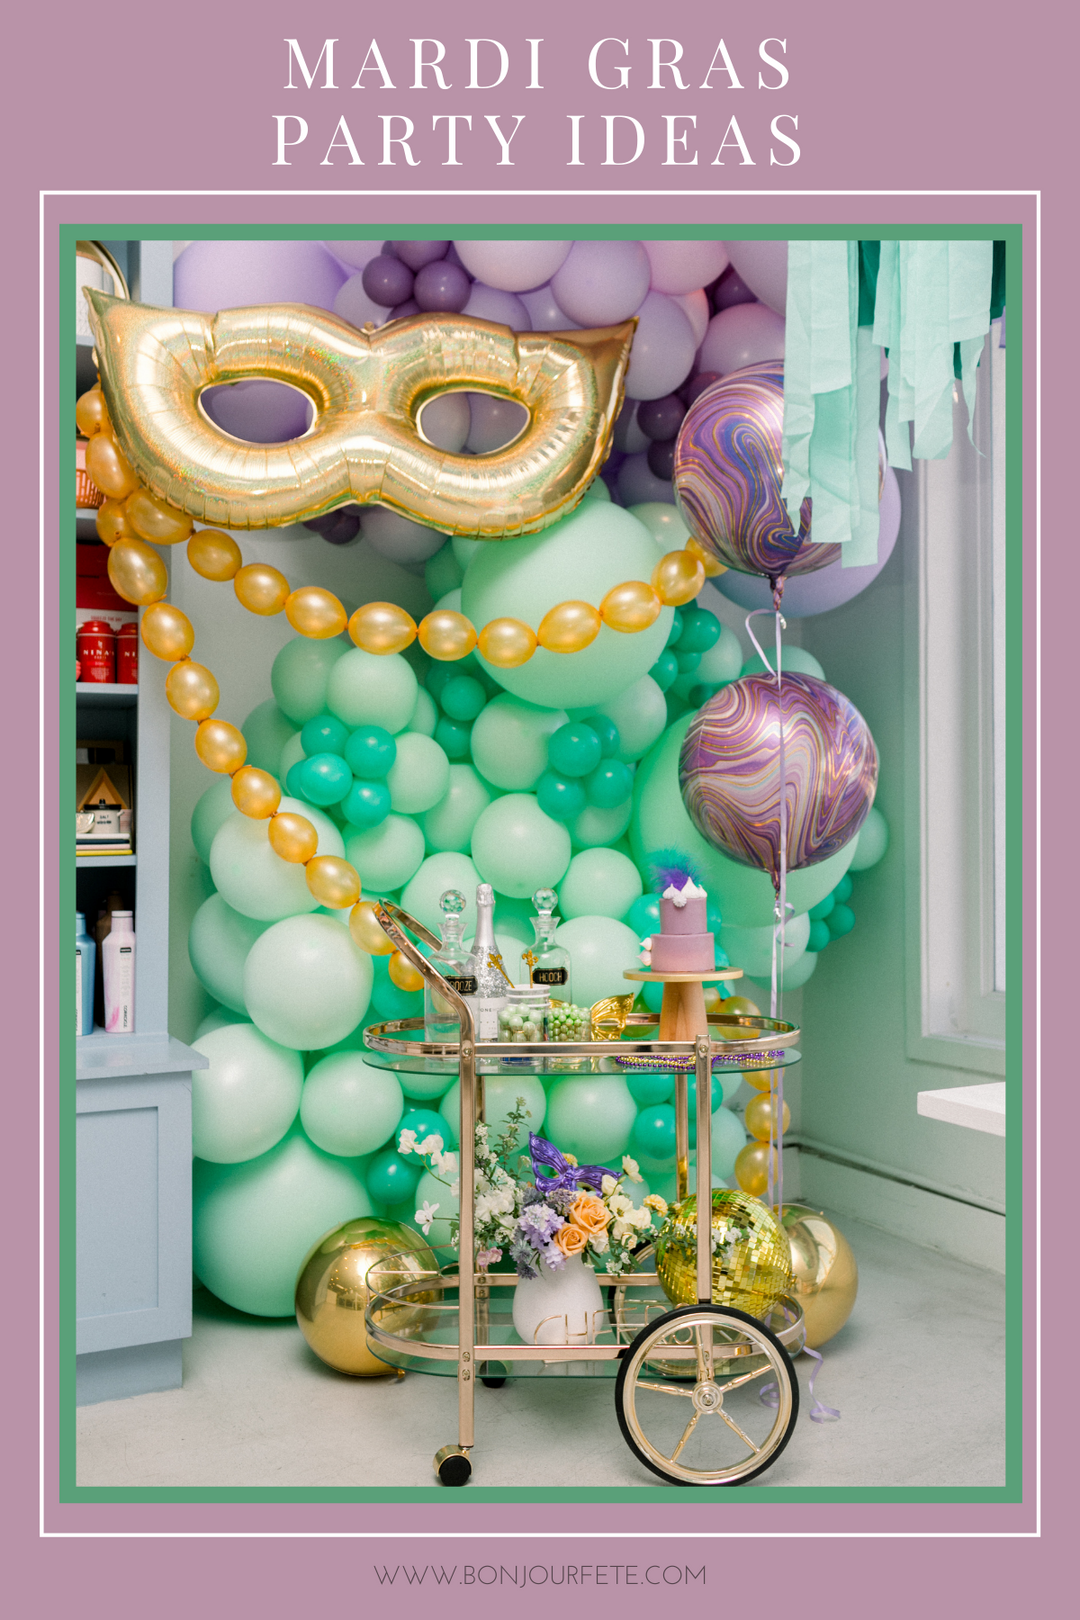 MARDI GRAS PARTY IDEAS AND DECORATIONS